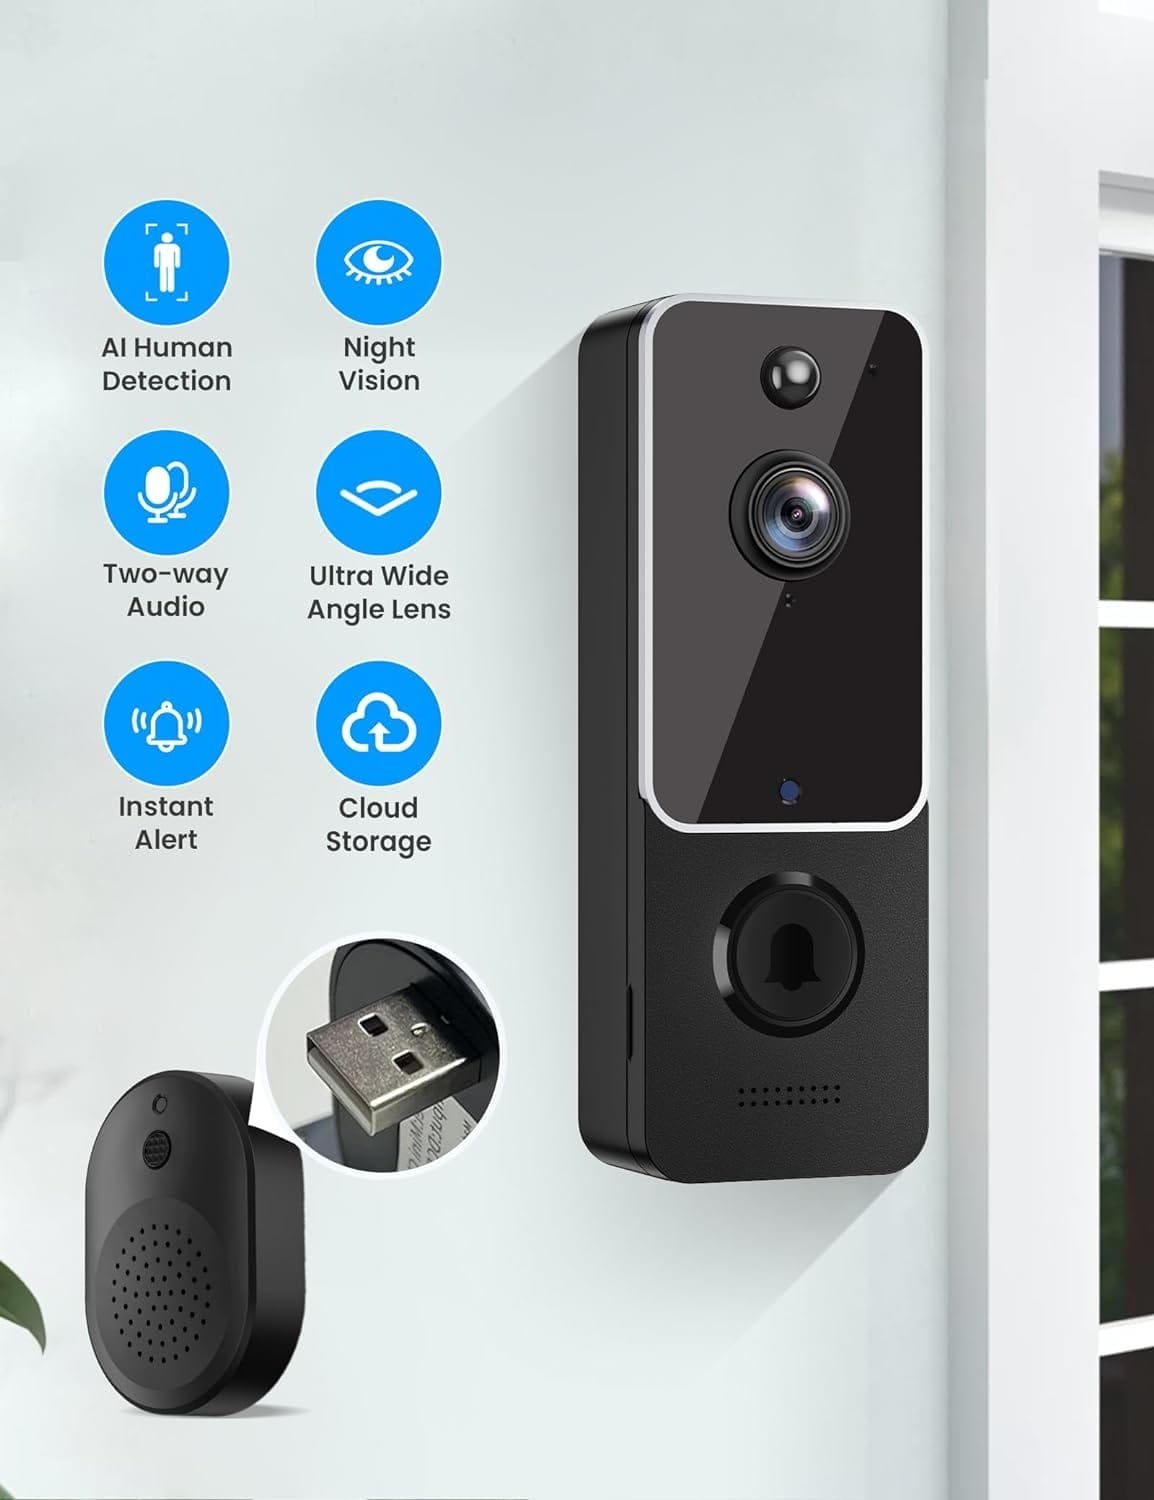 Aiwit Doorbell Camera Wireless, Indoor/Outdoor Surveillance Video Cam, Smart AI Human Detection, Live View, Included Chime Ringer, 2.4G WiFi, 2-Way Audio, Night Vision, Cloud Storage